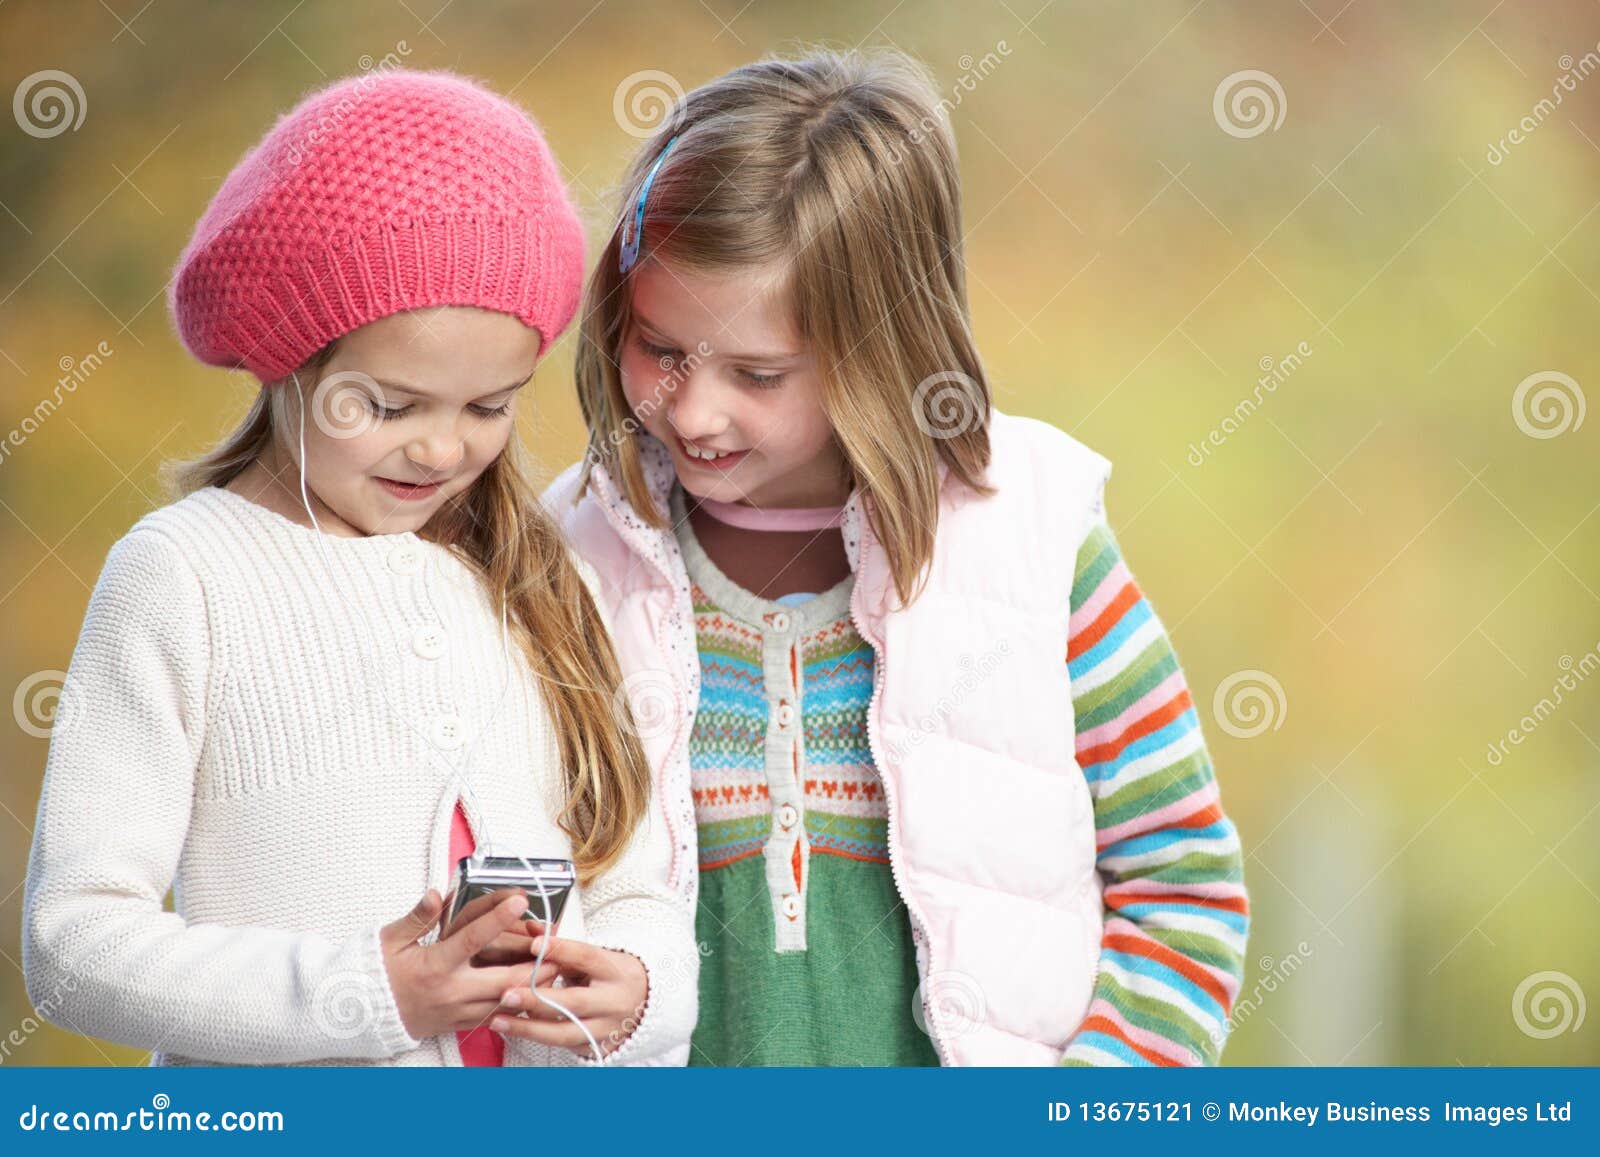 young girls outdoors with mp3 player